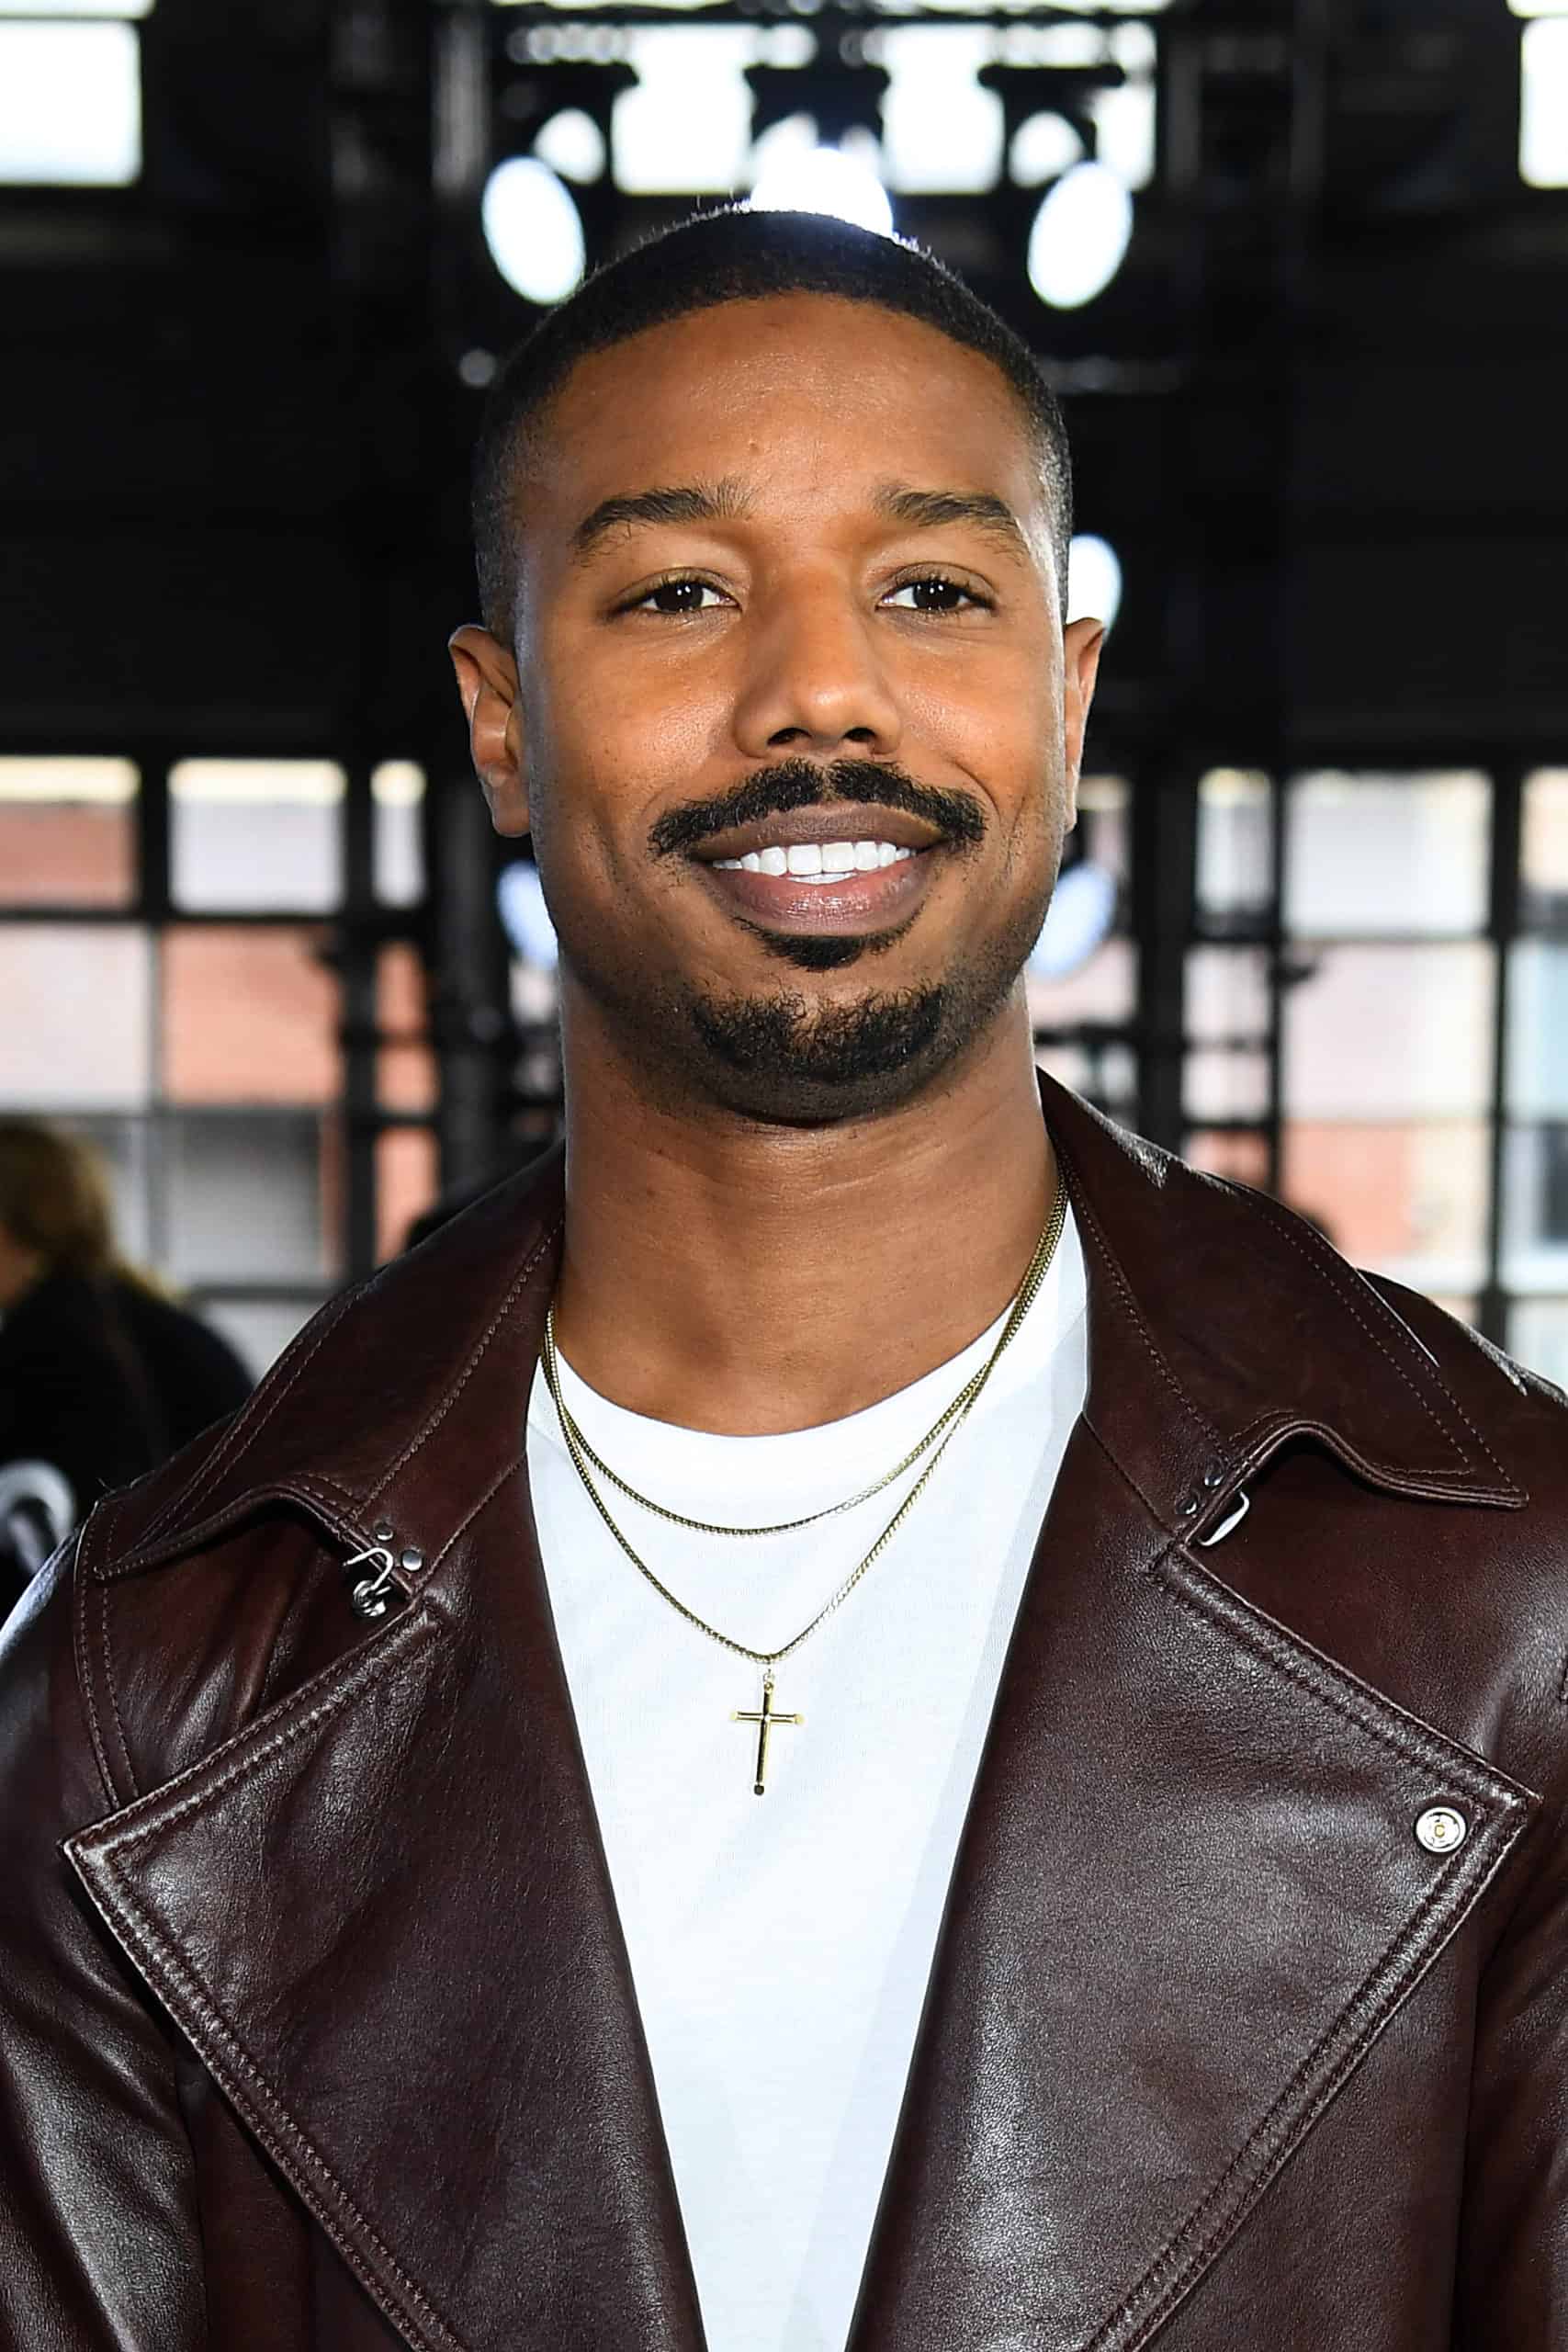 Michael B. Jordan Officially Named “Sexiest Man Alive” By “People” Magazine!